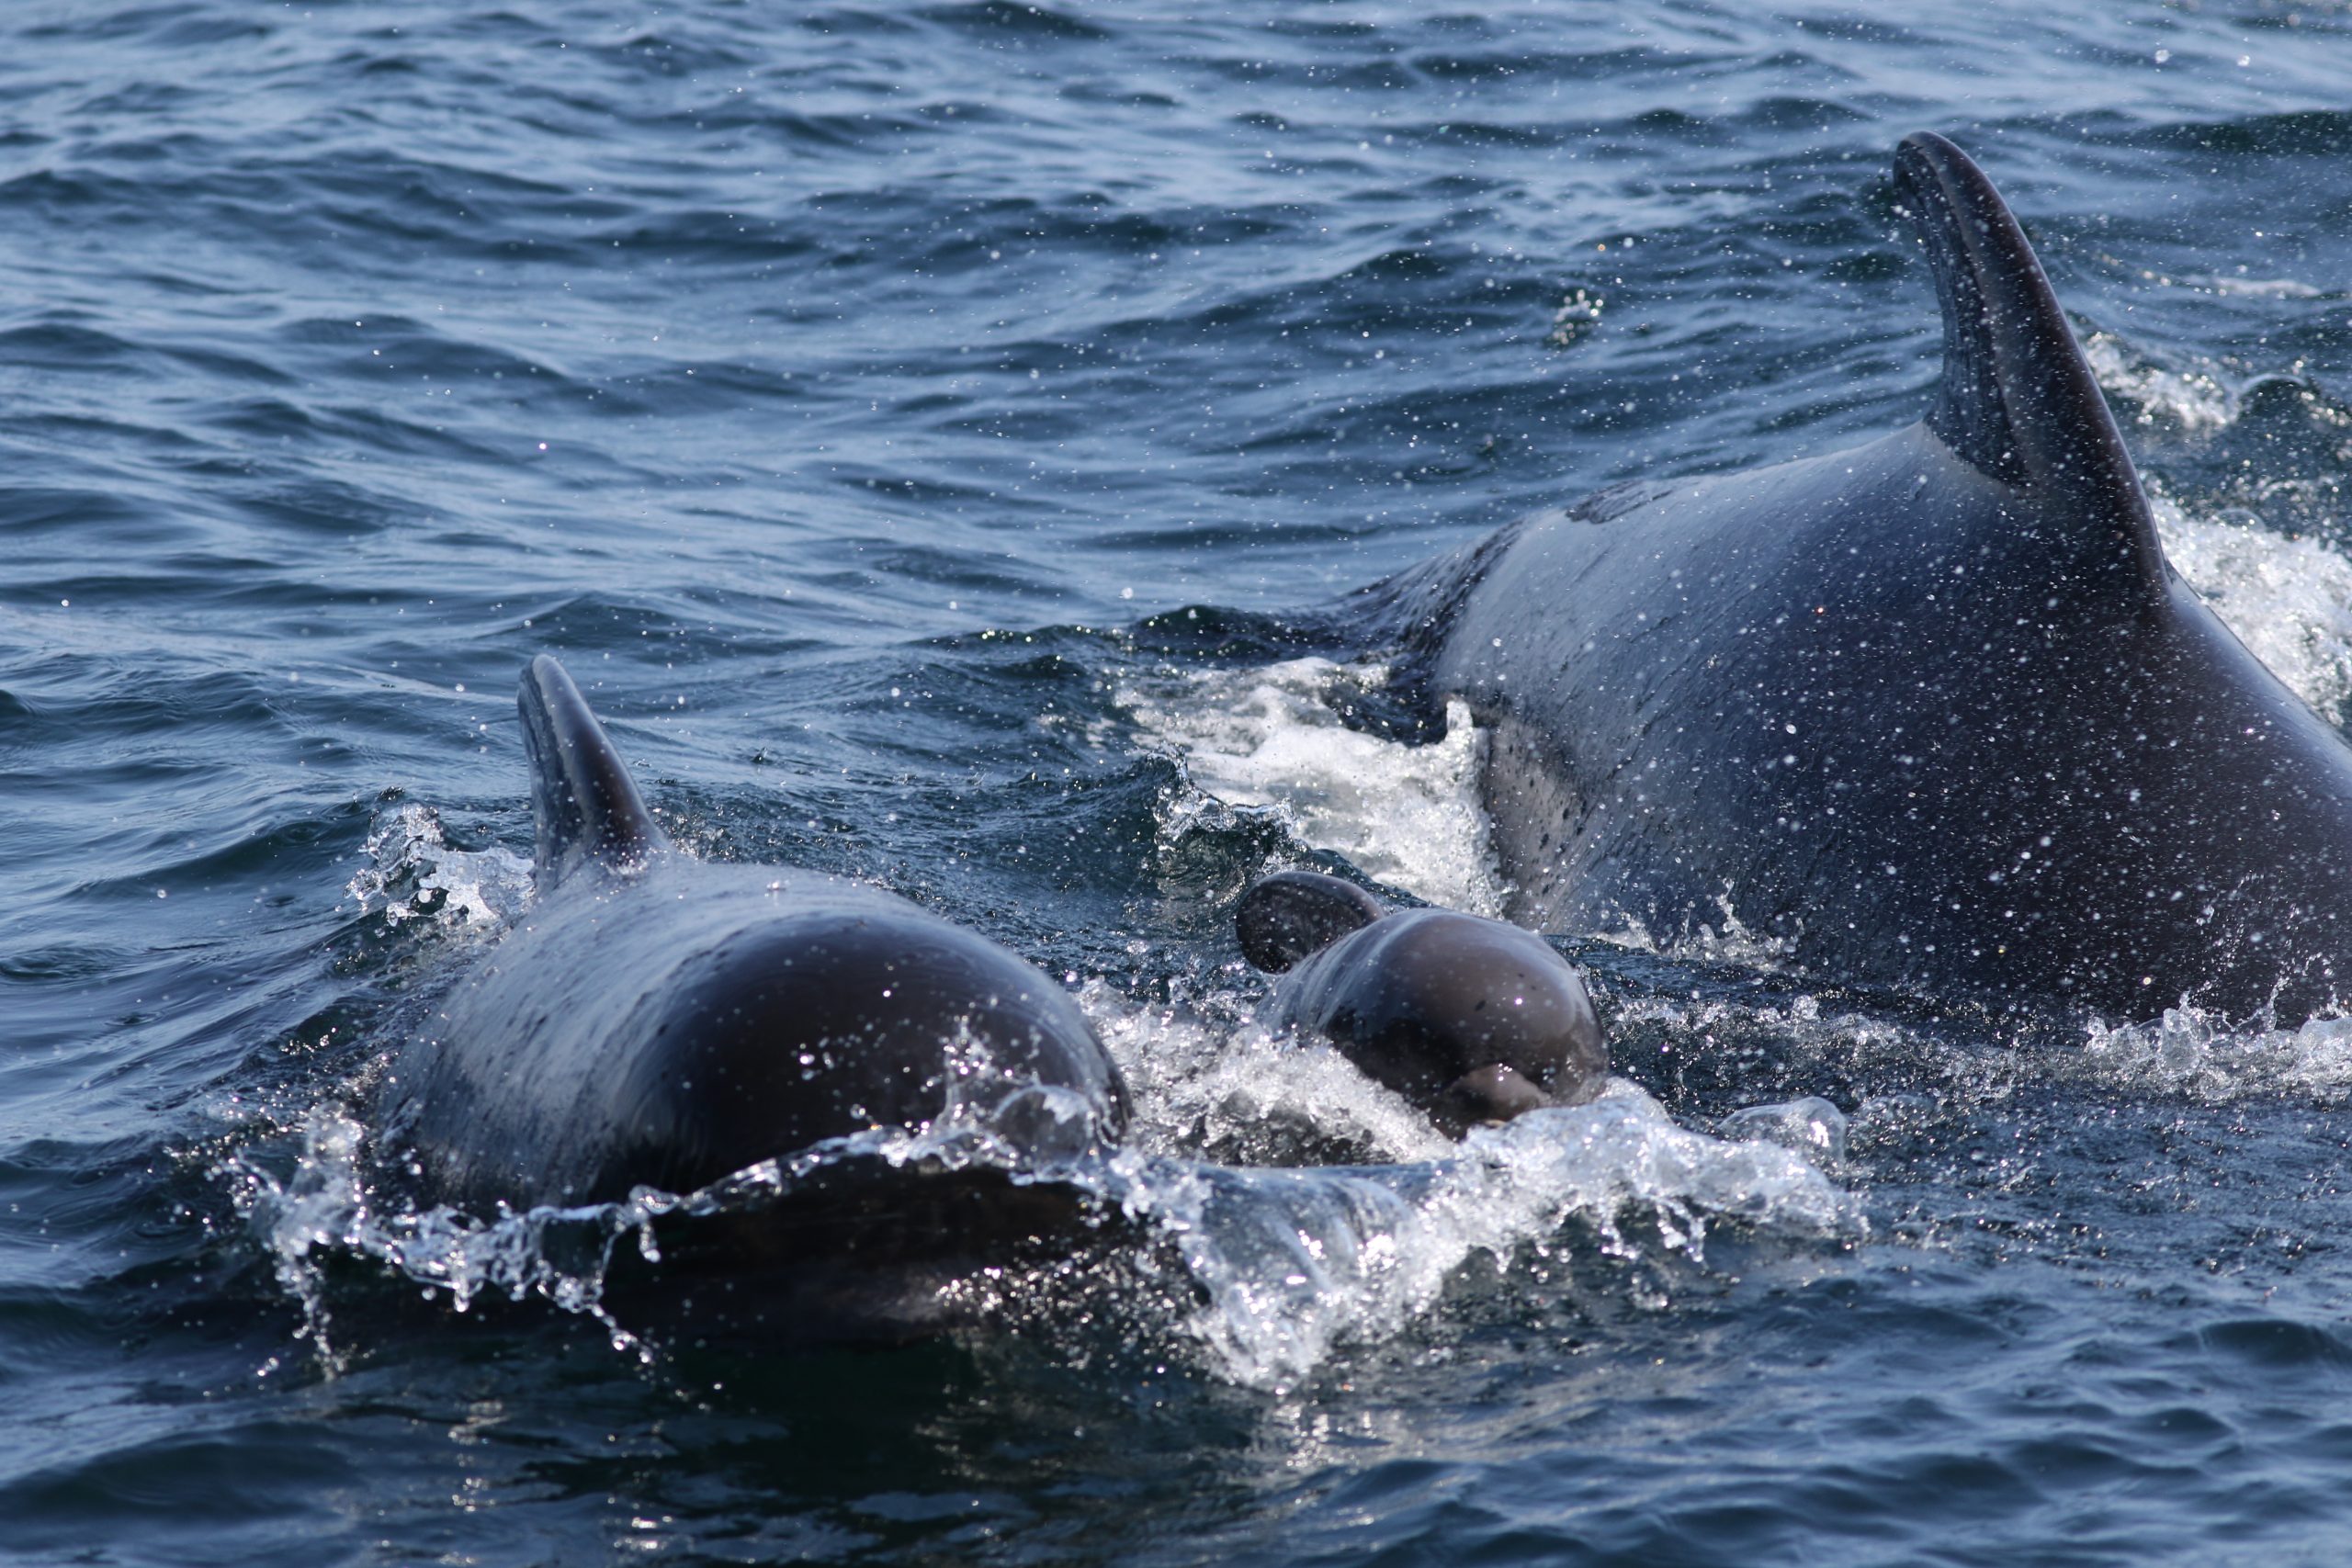 Two adult pilot swims flank a baby pilot whale in the water while breaching and heading directly towards the camera